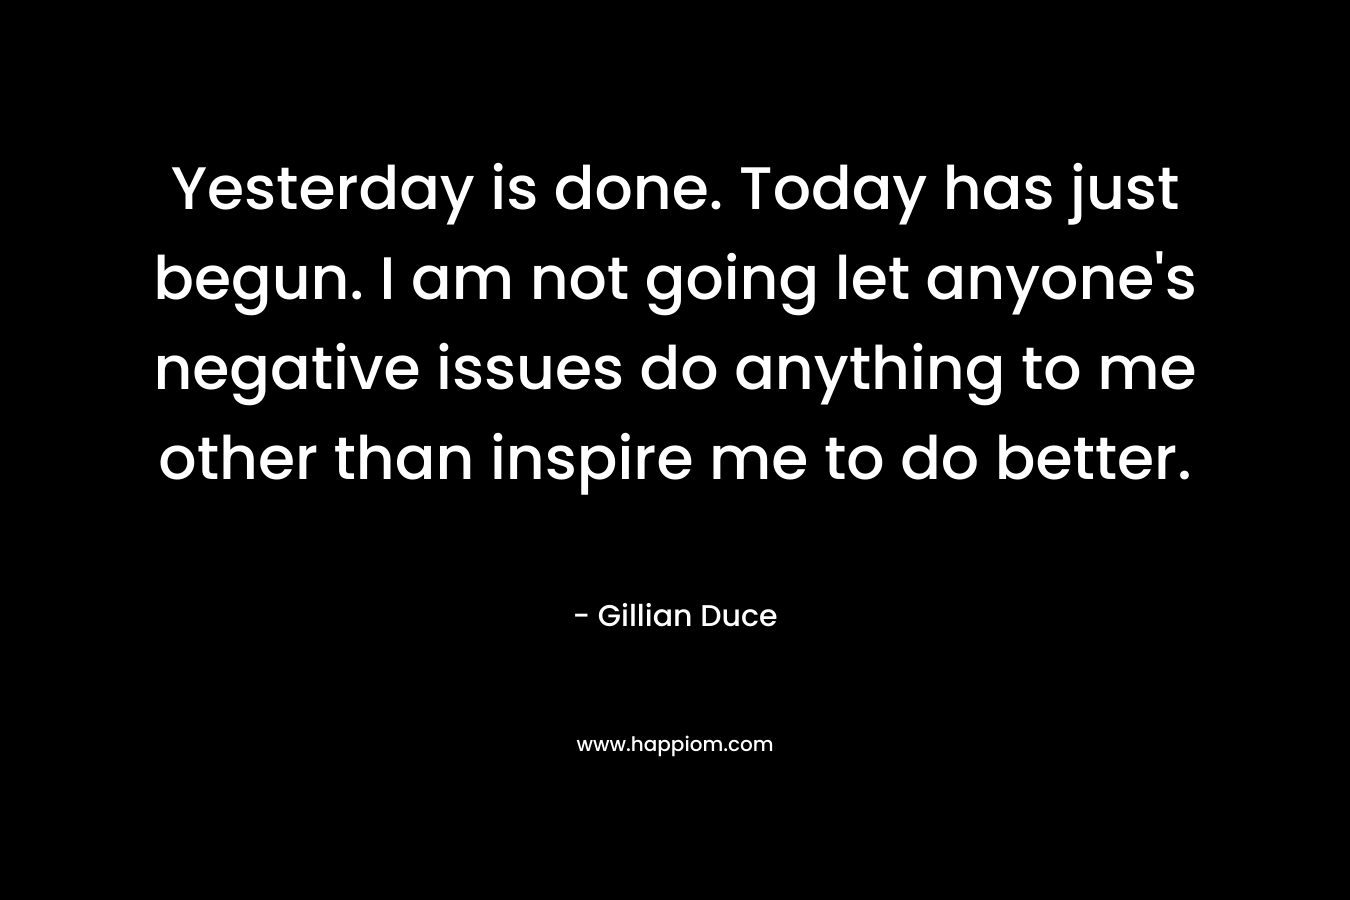 Yesterday is done. Today has just begun. I am not going let anyone’s negative issues do anything to me other than inspire me to do better. – Gillian Duce